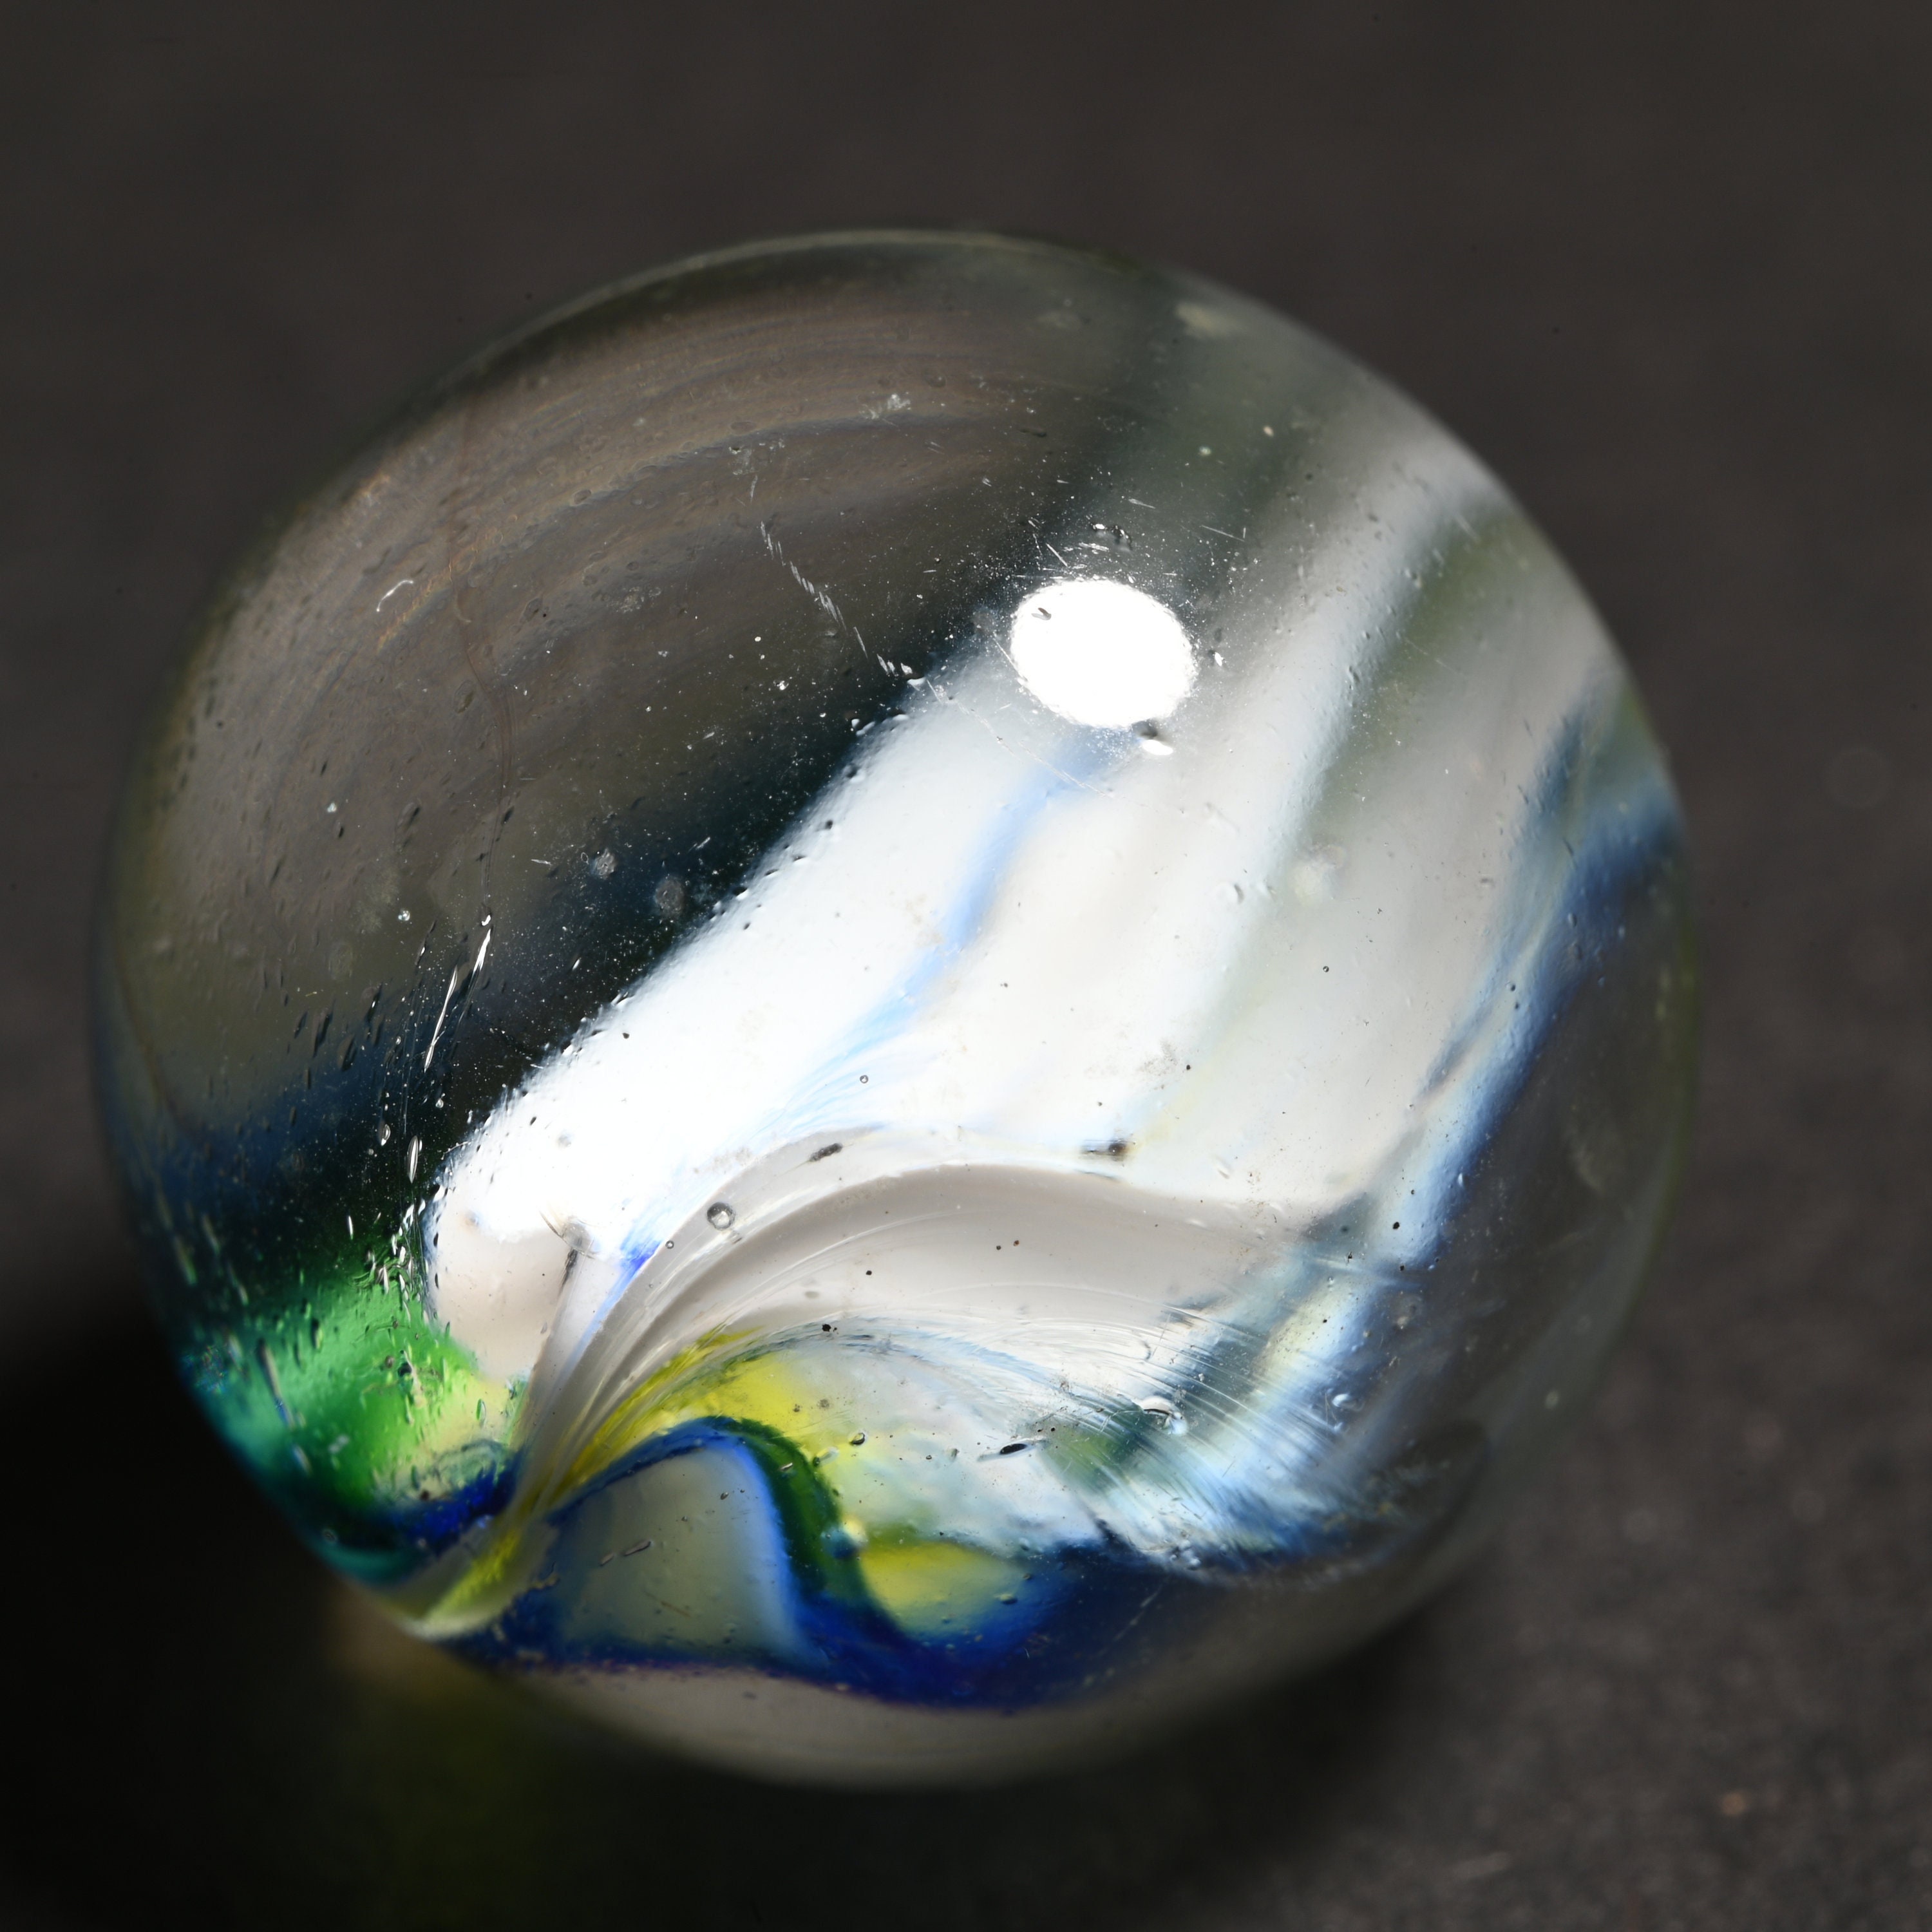 Fritz Glass marbles